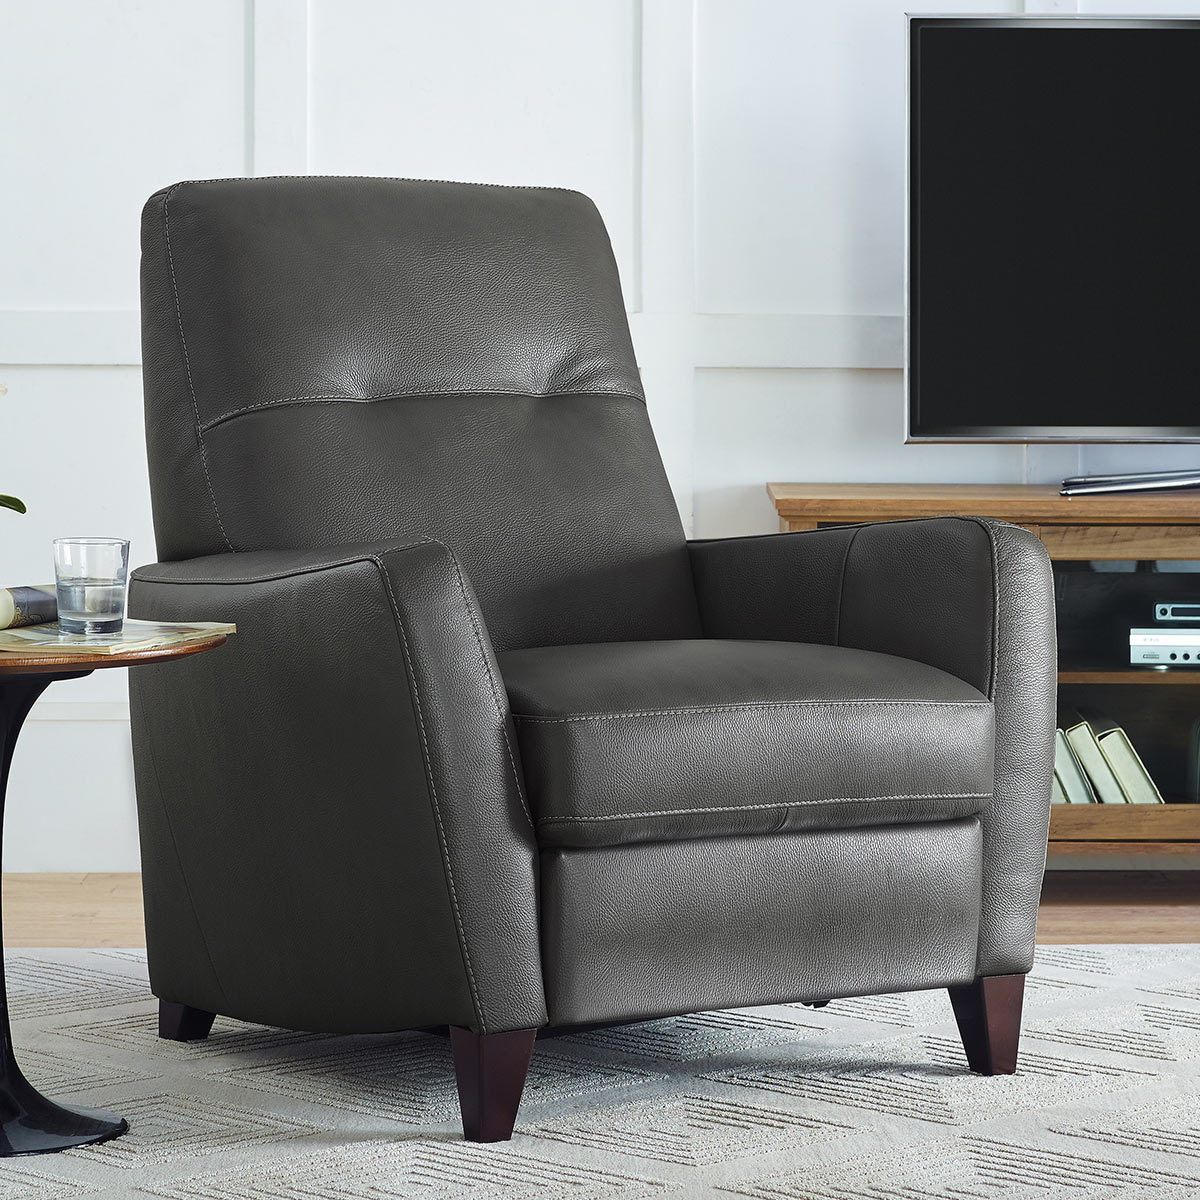 Natuzzigroup Mills Grey Leather Pushback Recliner Armchair